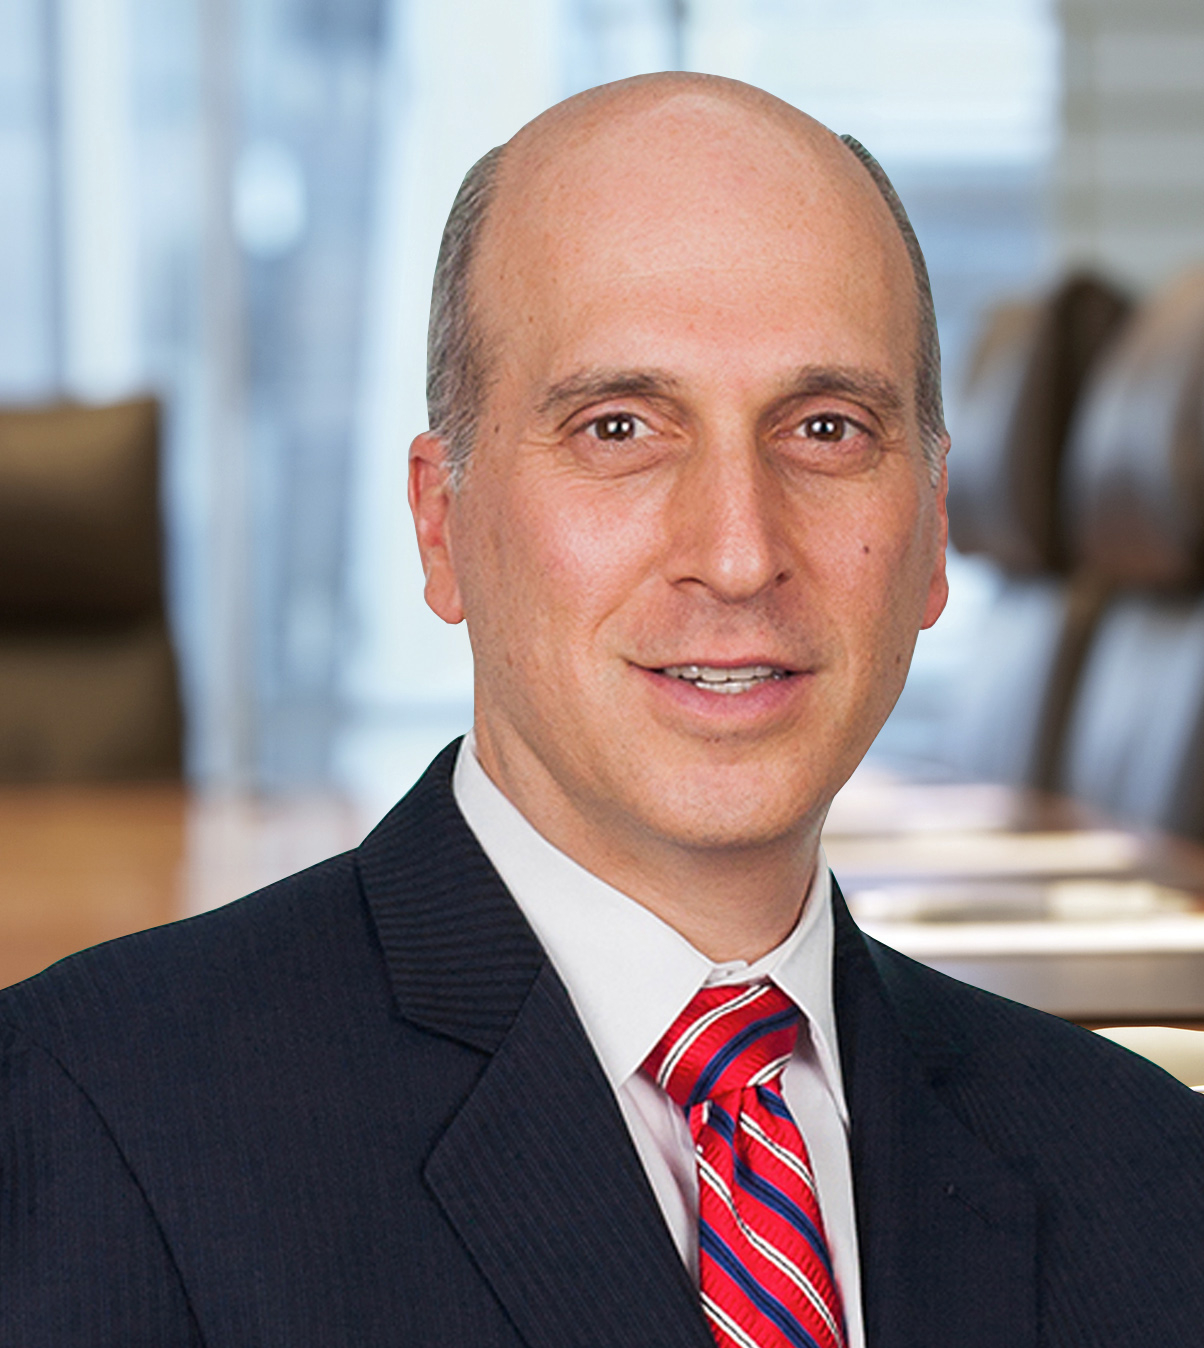 Michael S. Ettinger will be promoted to Executive Vice President and Chief Operating Officer of Henry Schein, effective July 1, 2022. (Photo: Business Wire)